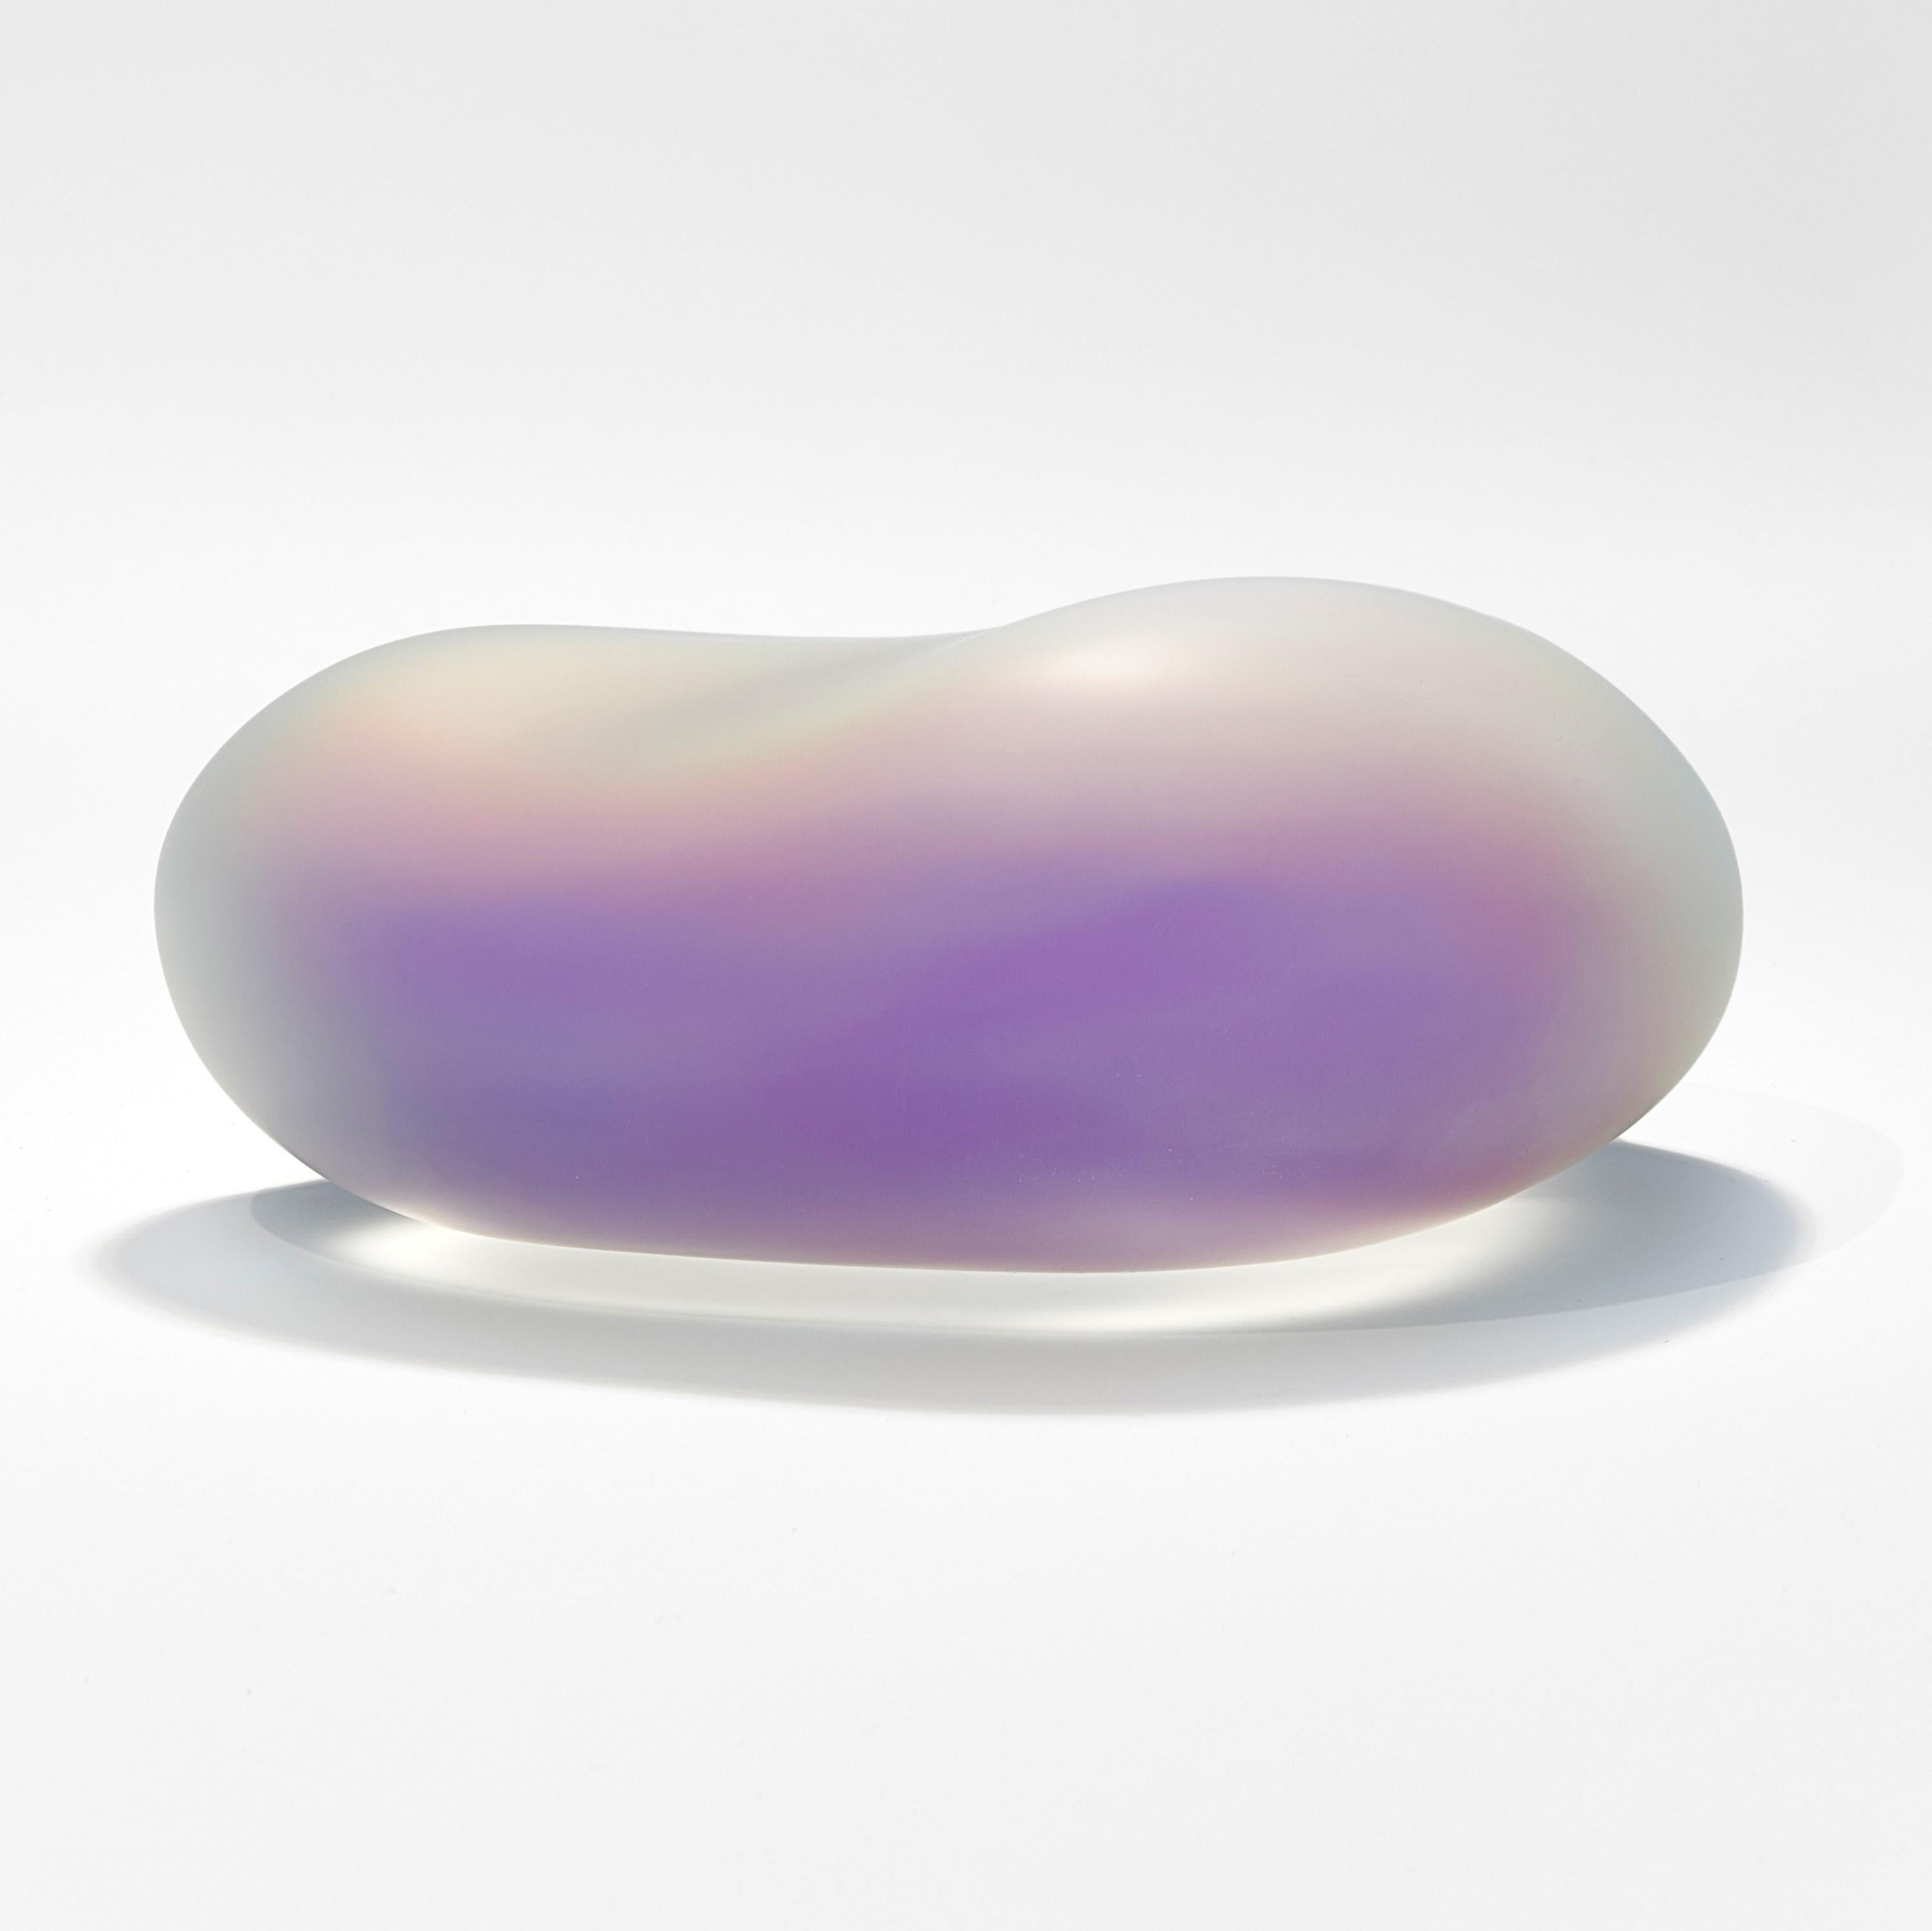 Organic Modern Moon-rock 010, clear glass sculptural rock with iridescent colours by Jon Lewis